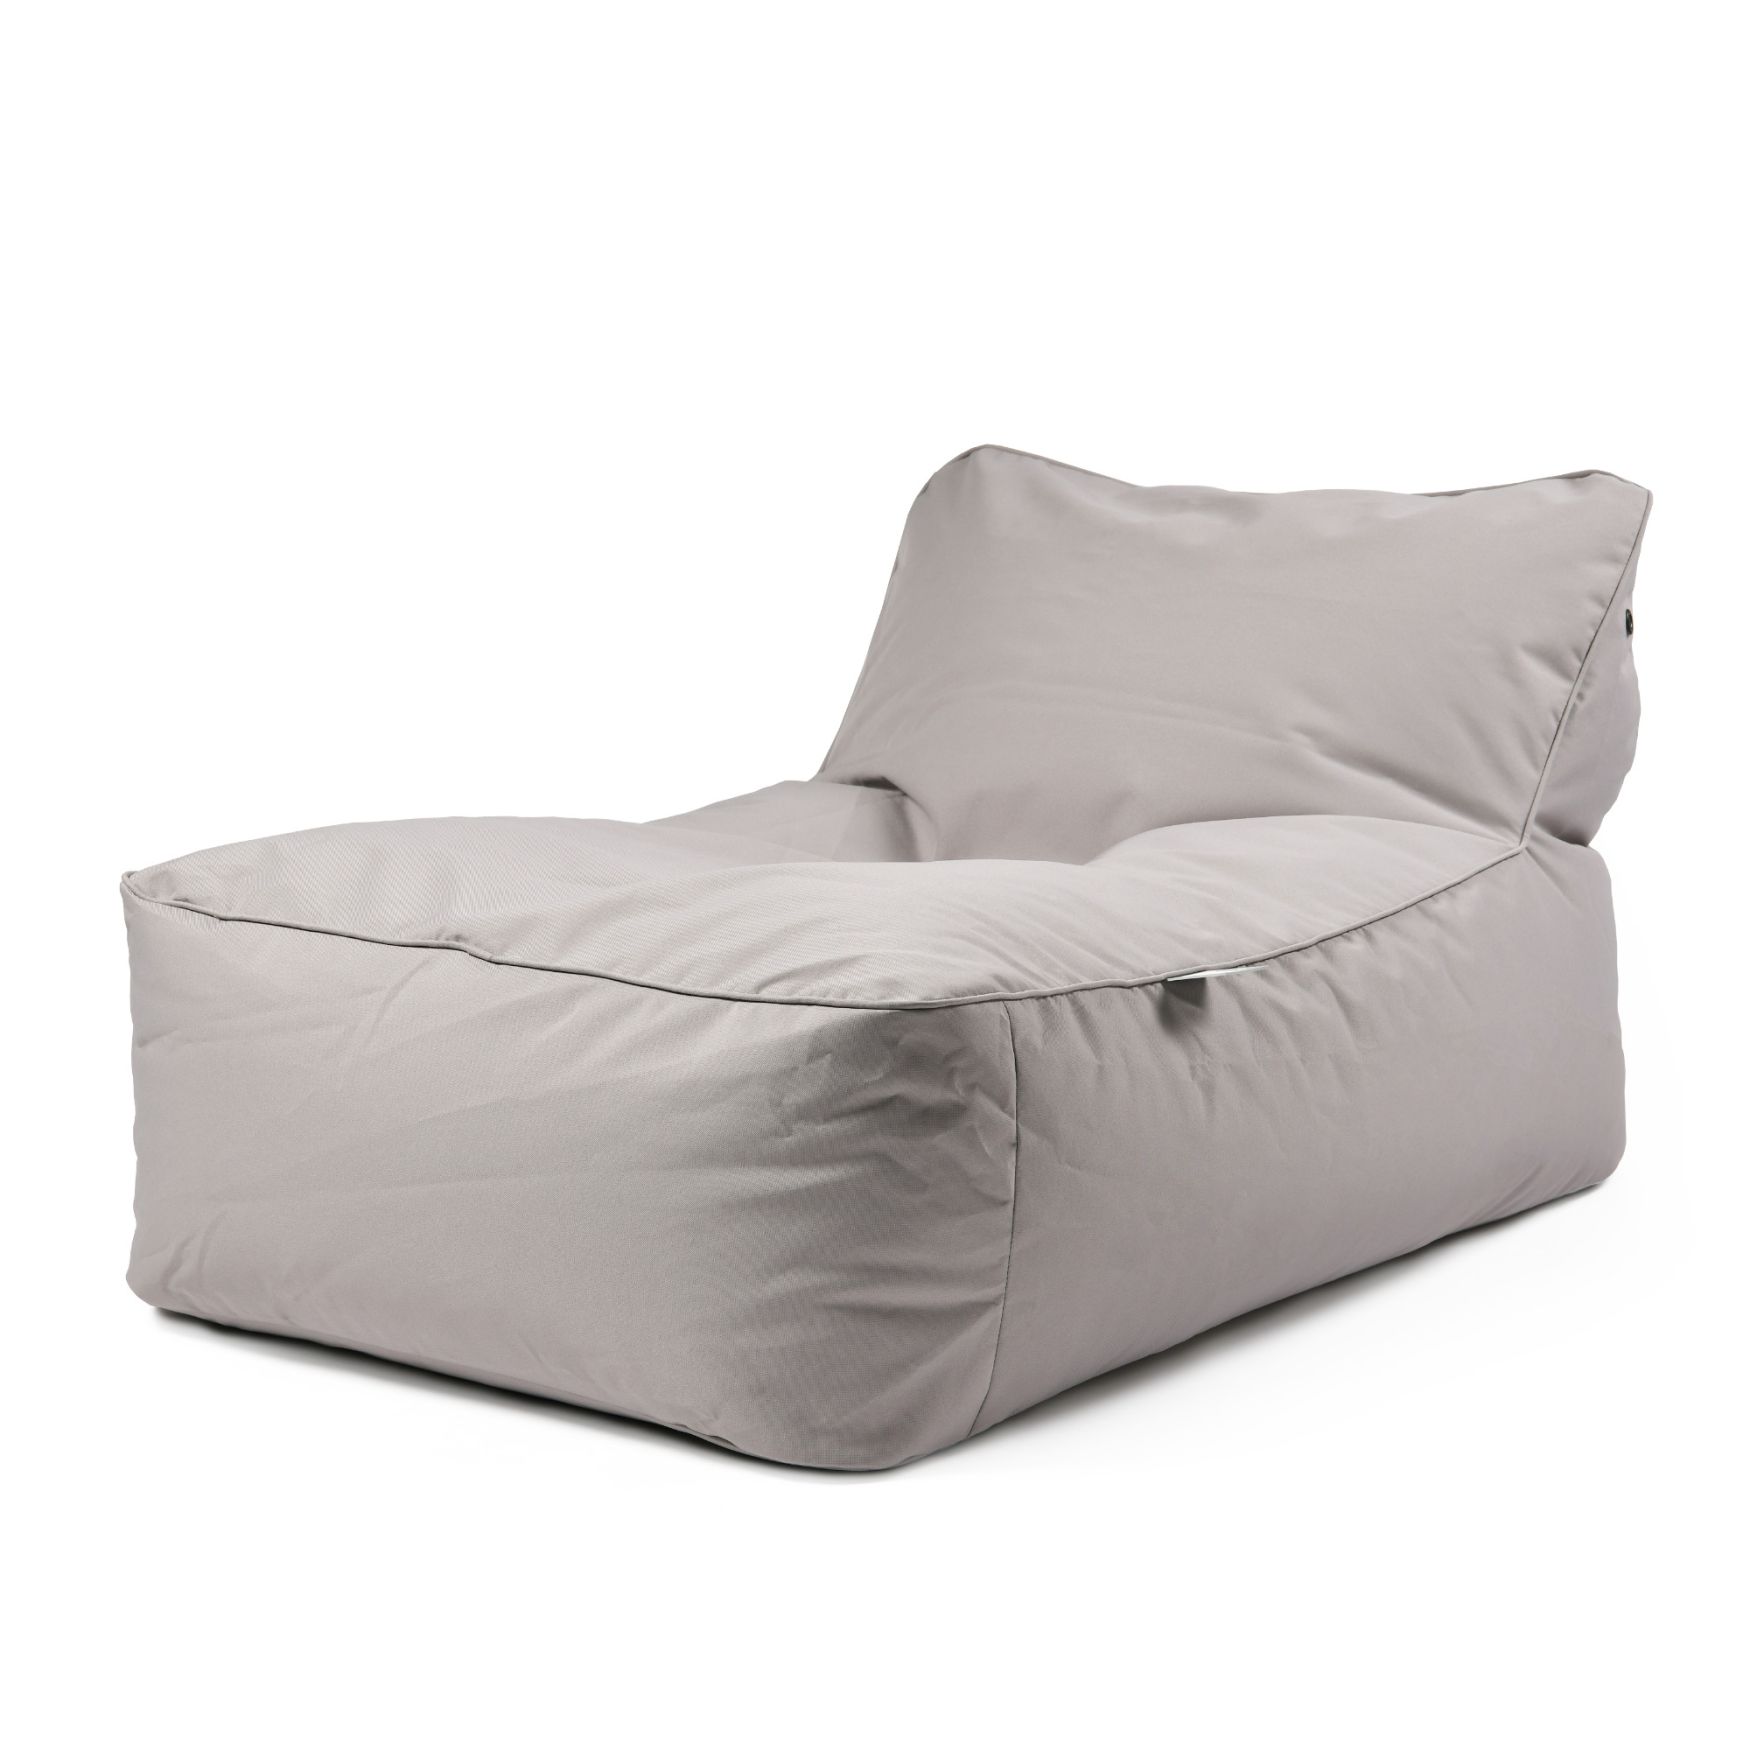 extreme lounging bbed lounger loungebed outdoor silver grey